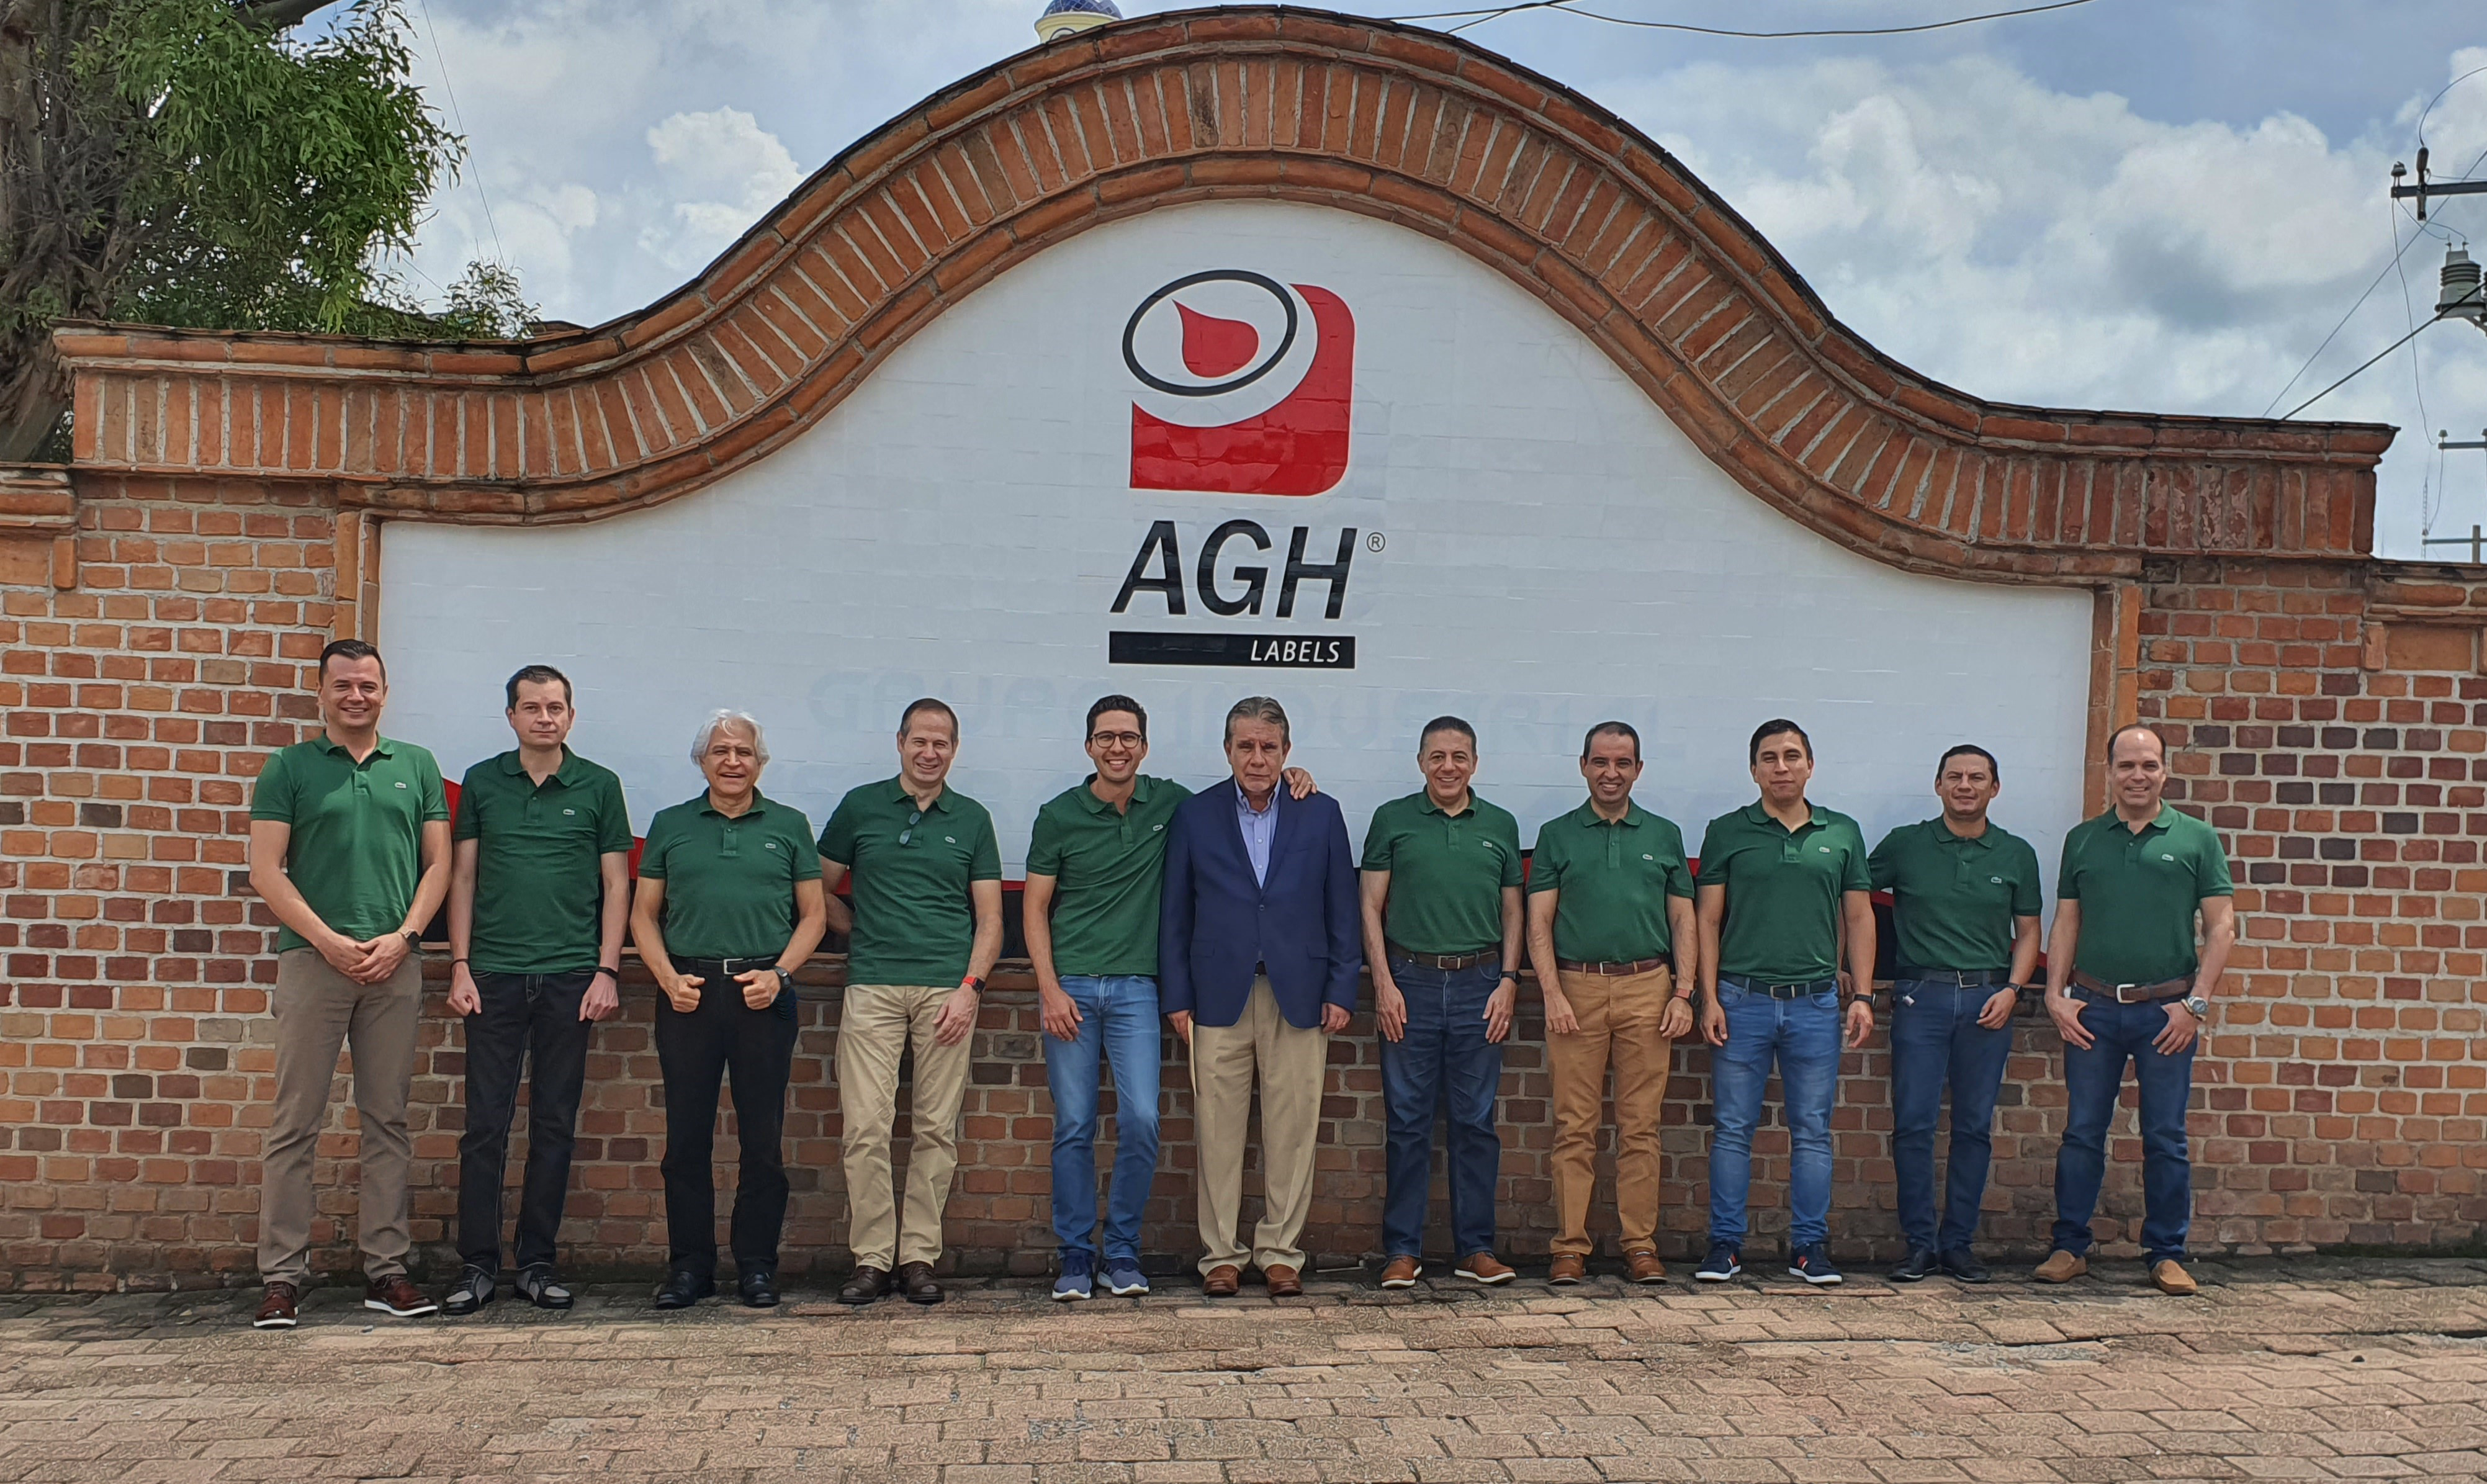 AGH labels team picture